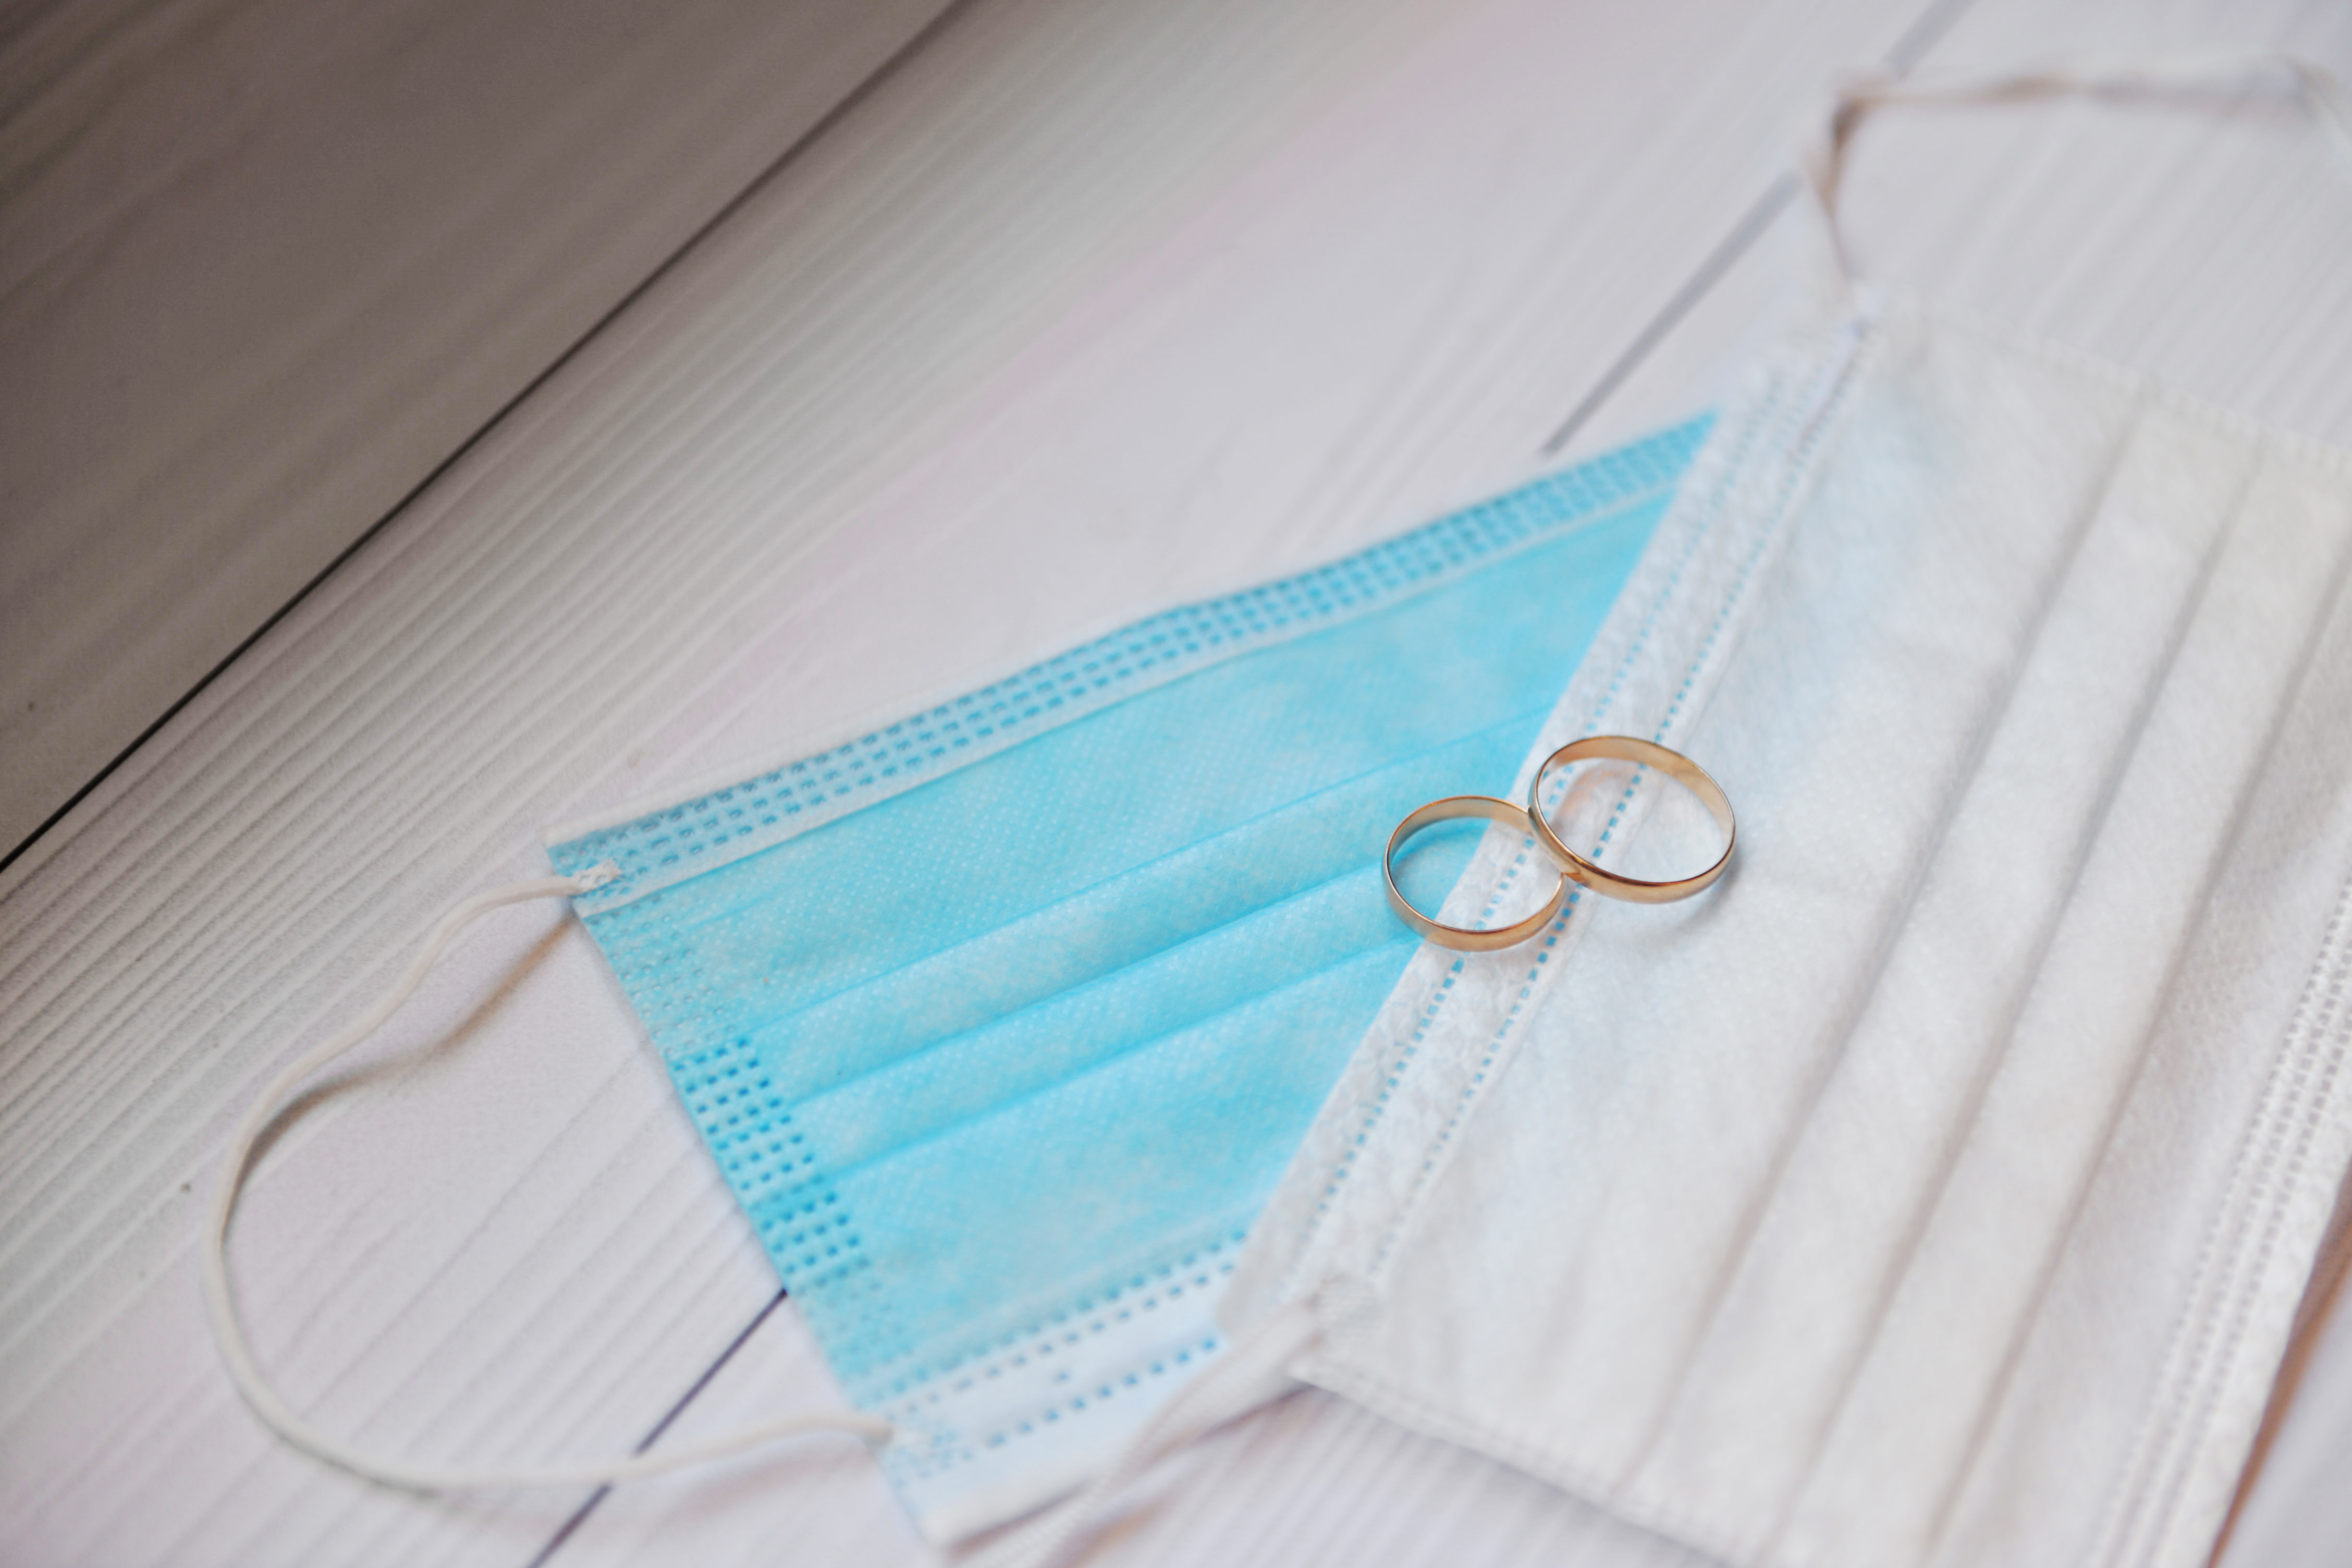 Two surgical masks and two wedding rings